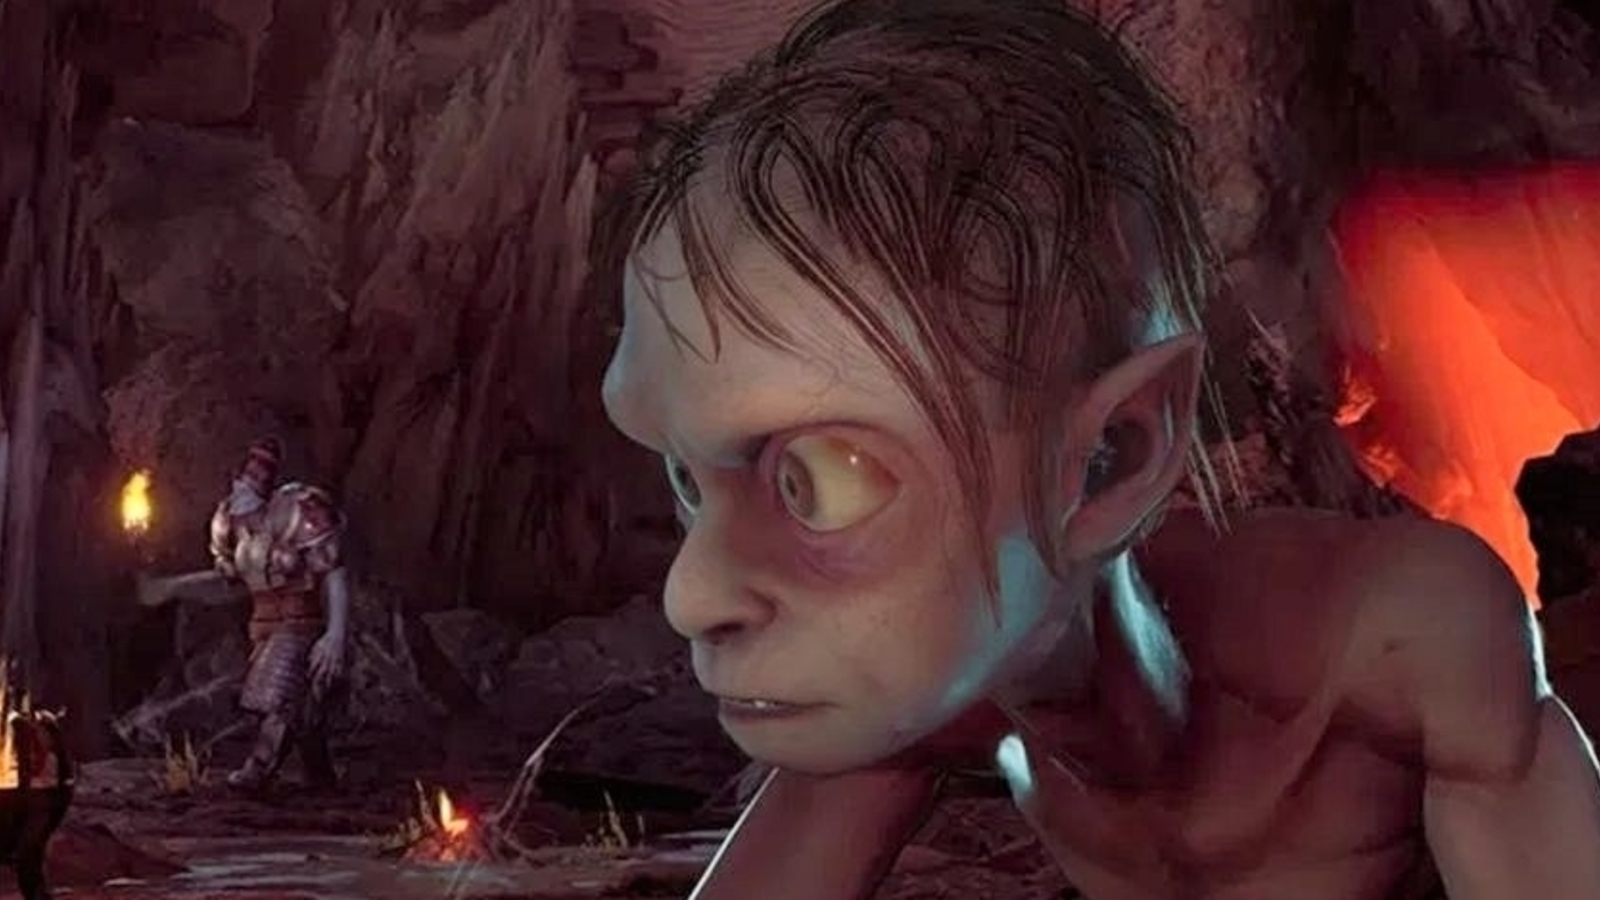 Gollum in the new lord of the rings game has more hair than in the movies to make him less creepy